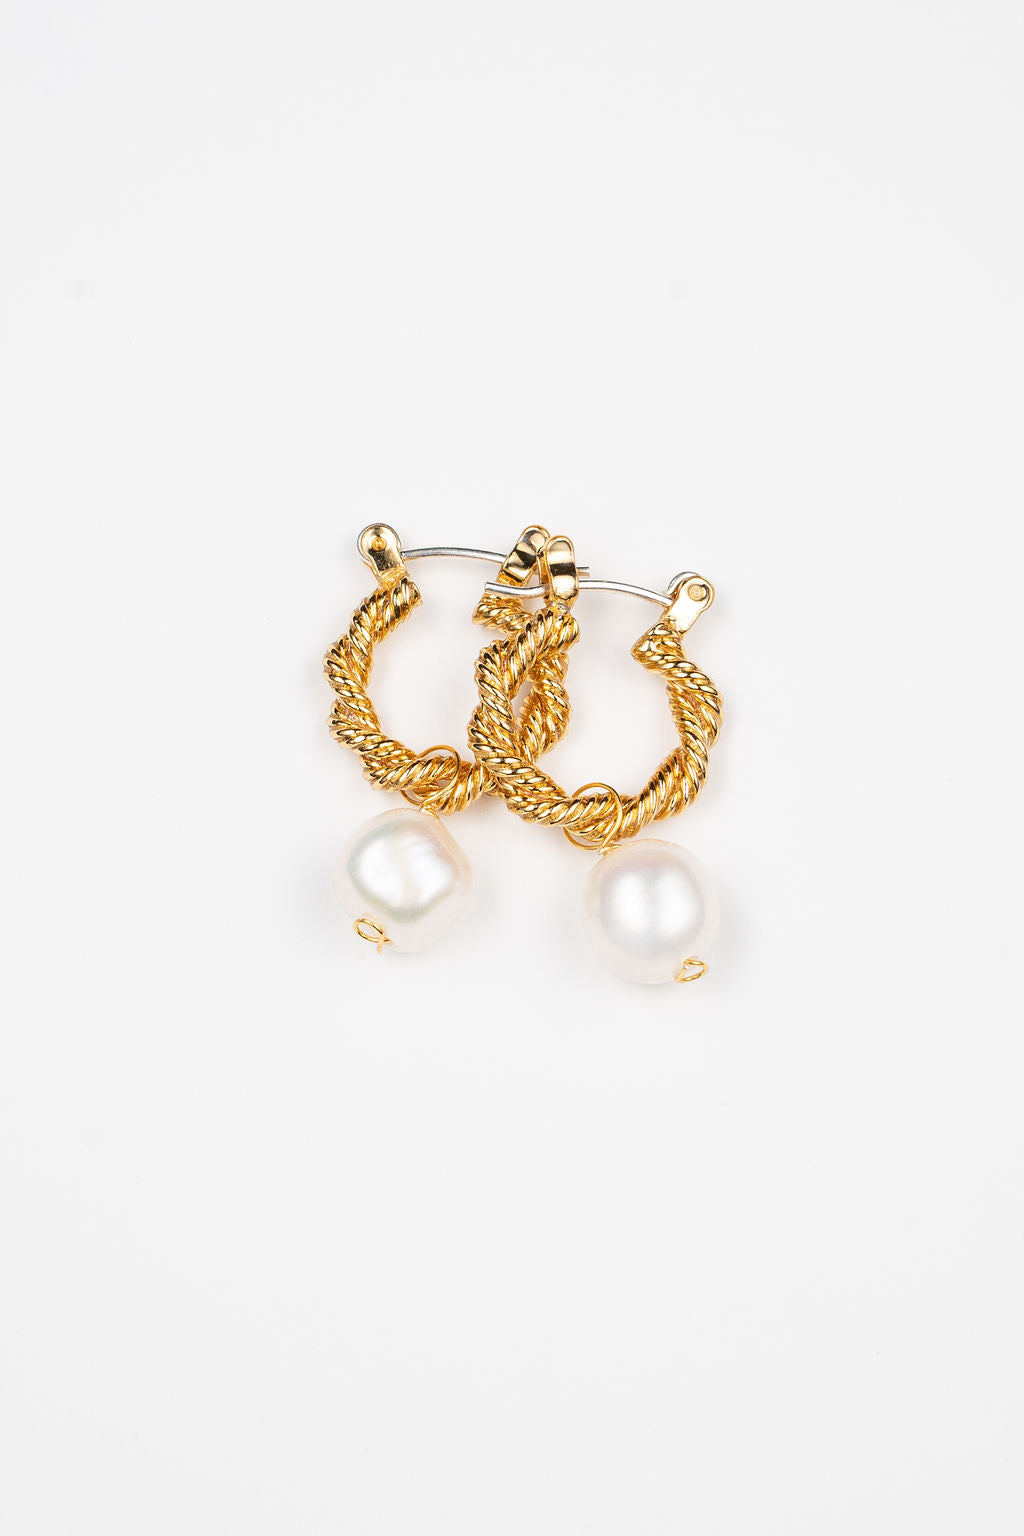 Double Aspen Hoops Small with Pearls